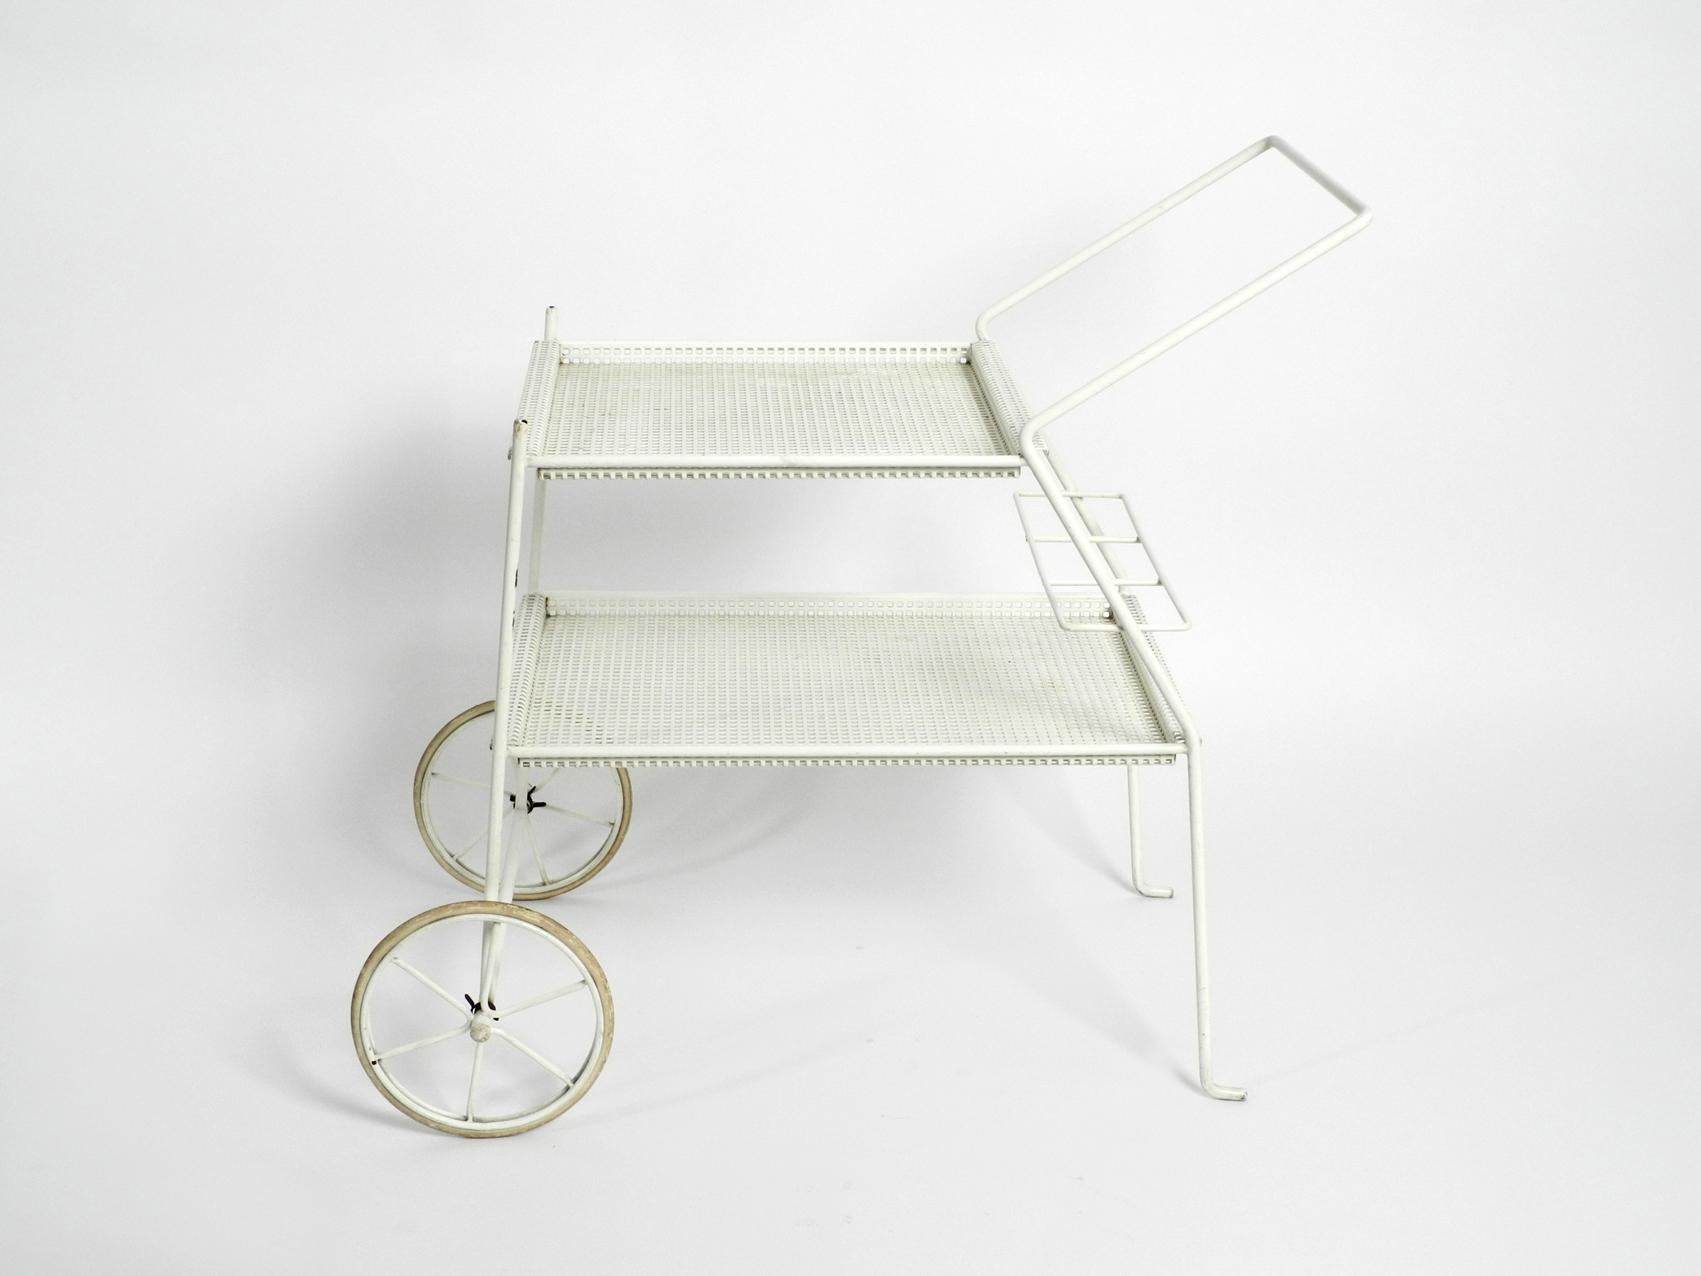 Mid-20th Century Very Rare Mid-Century Modern Perforated Metal Serving Trolley from Italy